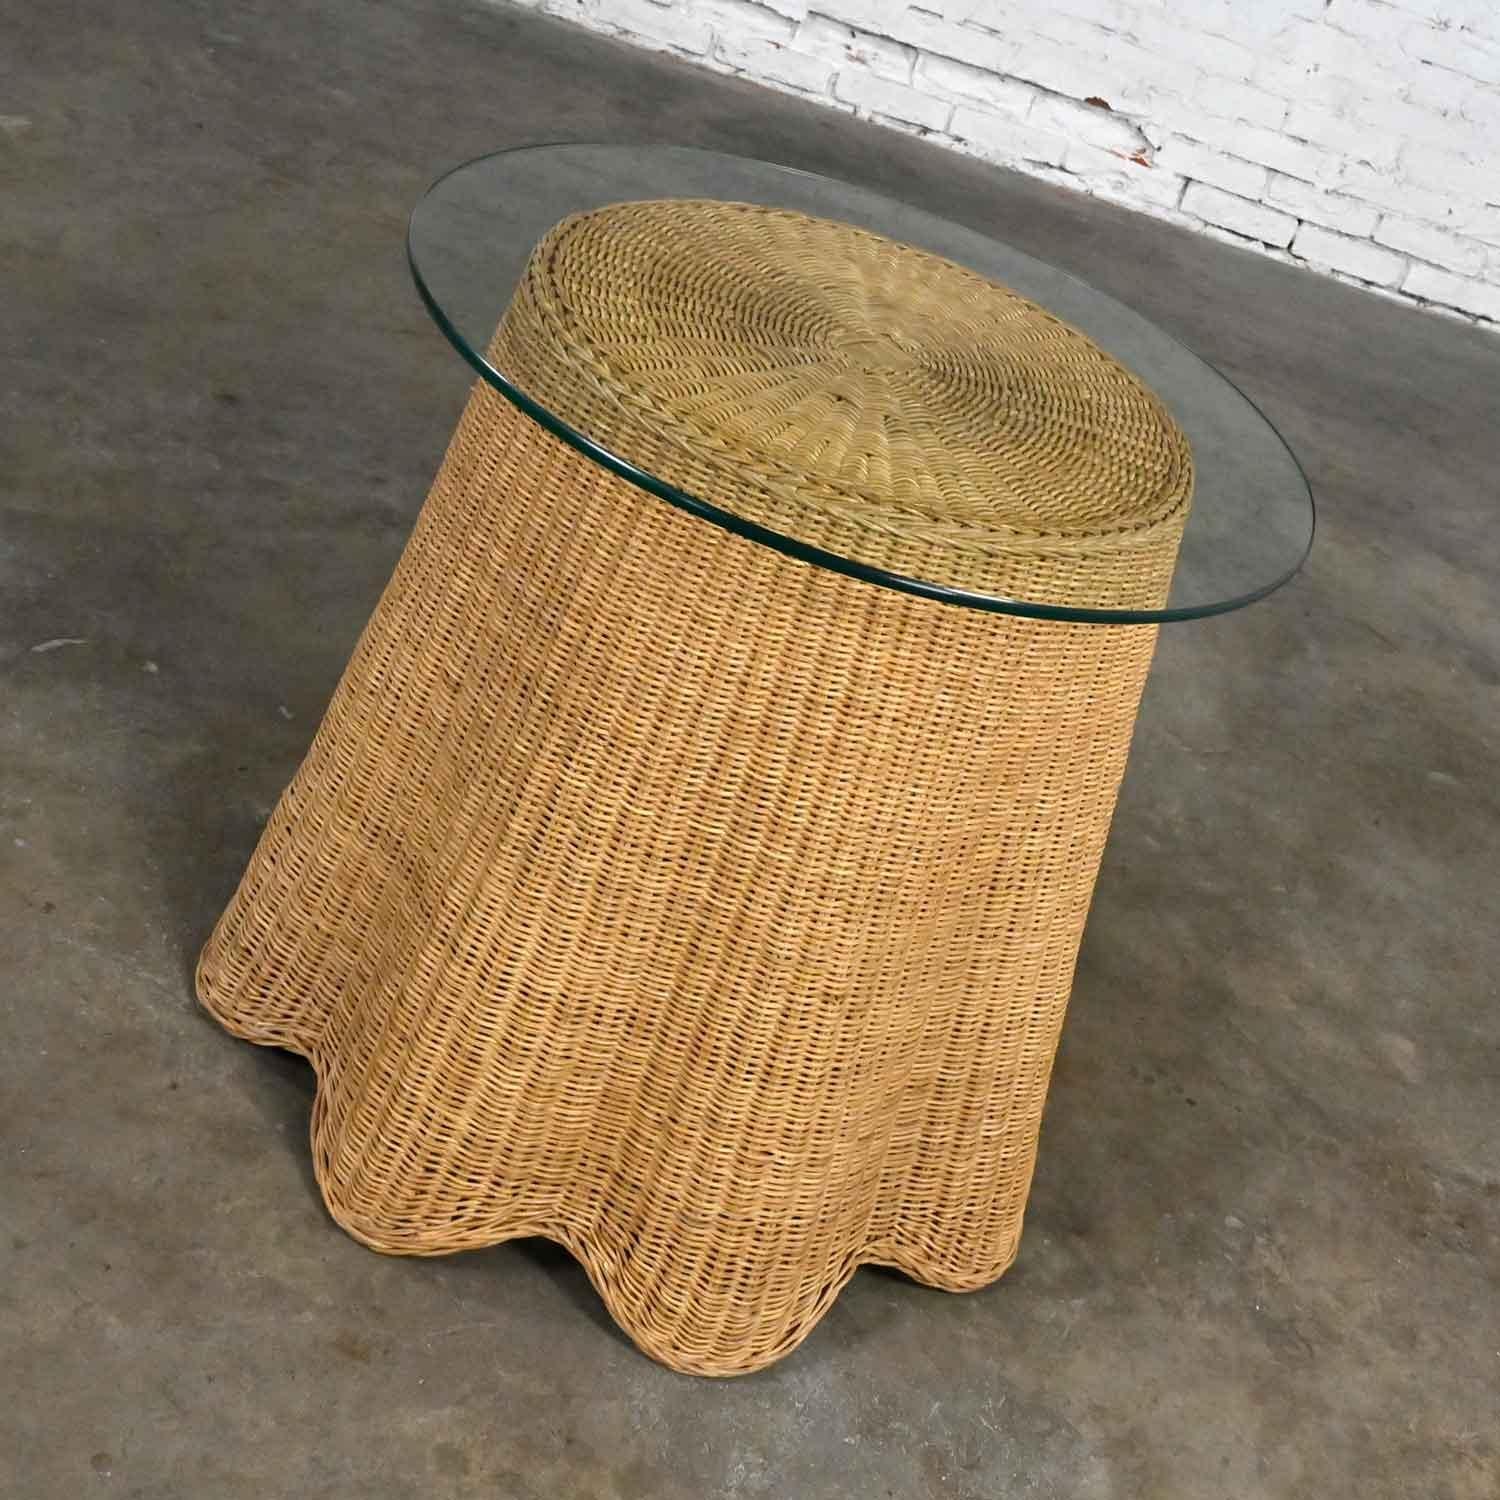 Unknown Vintage Trompe L’oeil Draped Wicker End or Side Table with Round Glass Top